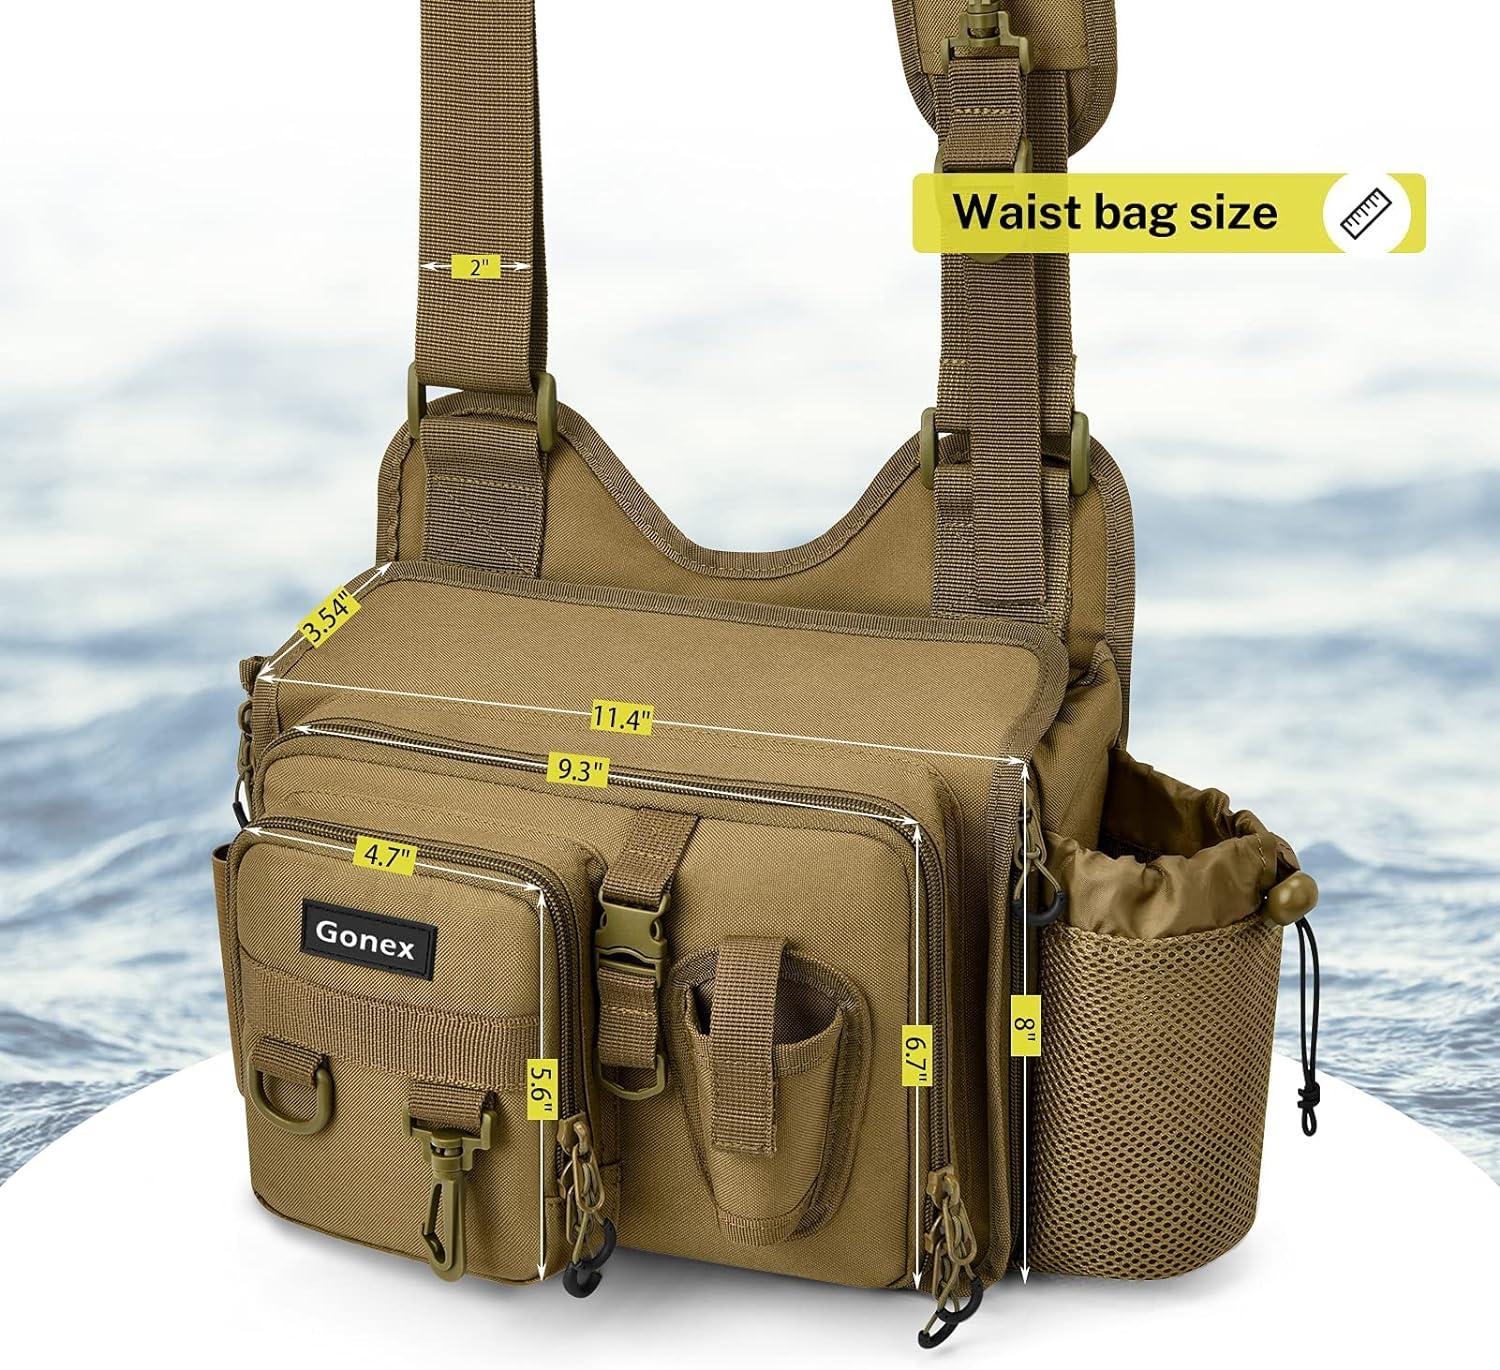 Fishing Pole Storage Case Carrier Bag With Strap Fishing Bag Crossbody Bag